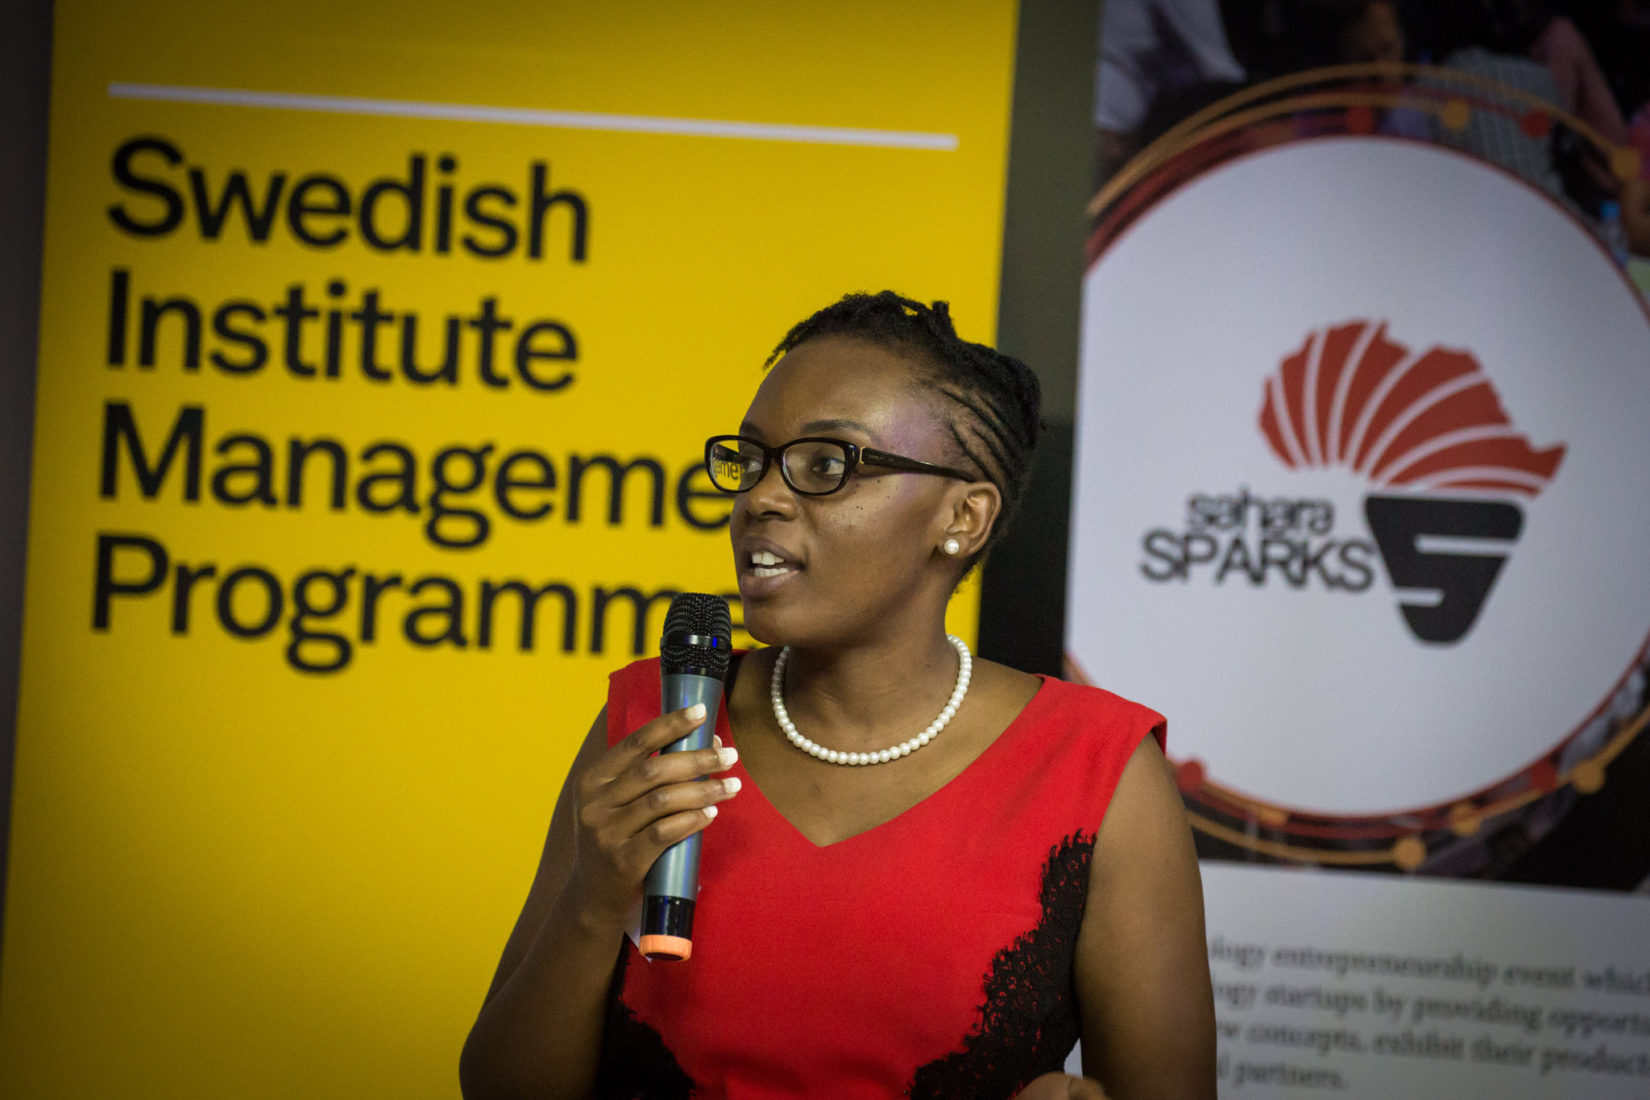 Swedish Institute Management Programme Africa 2018 for Change-makers (Funded Trip to Sweden)